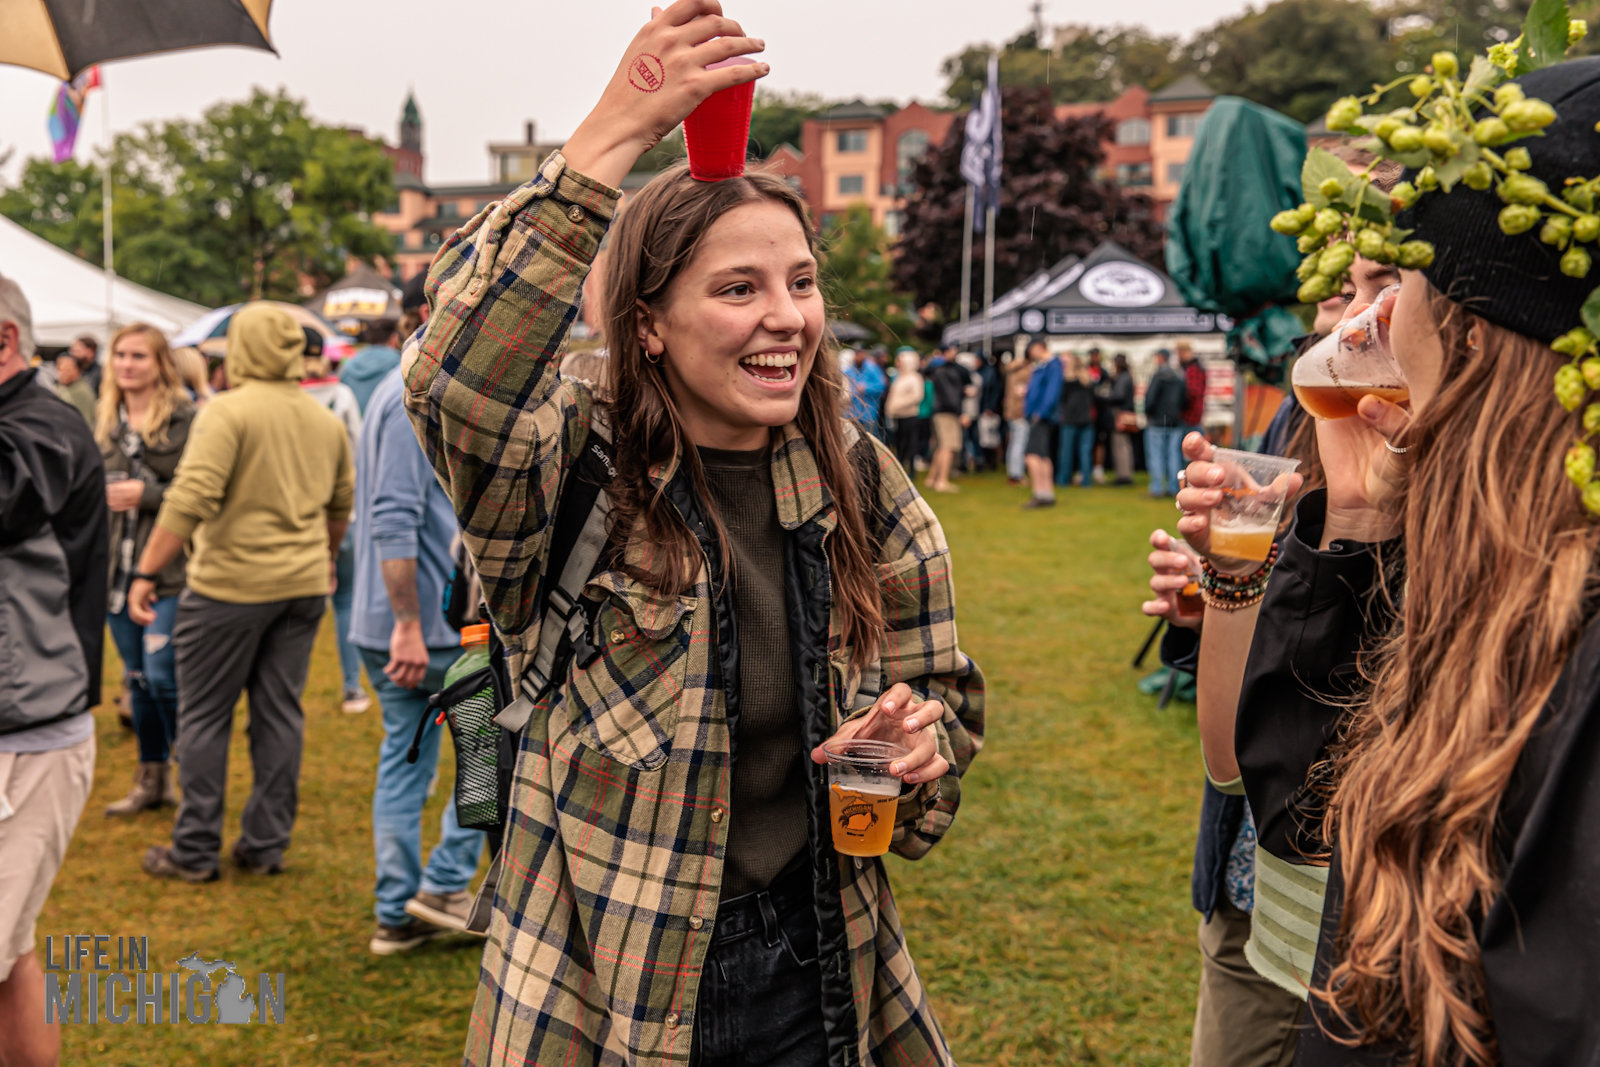 UP Beer Festival in Marquette drew the crowds, despite the weather